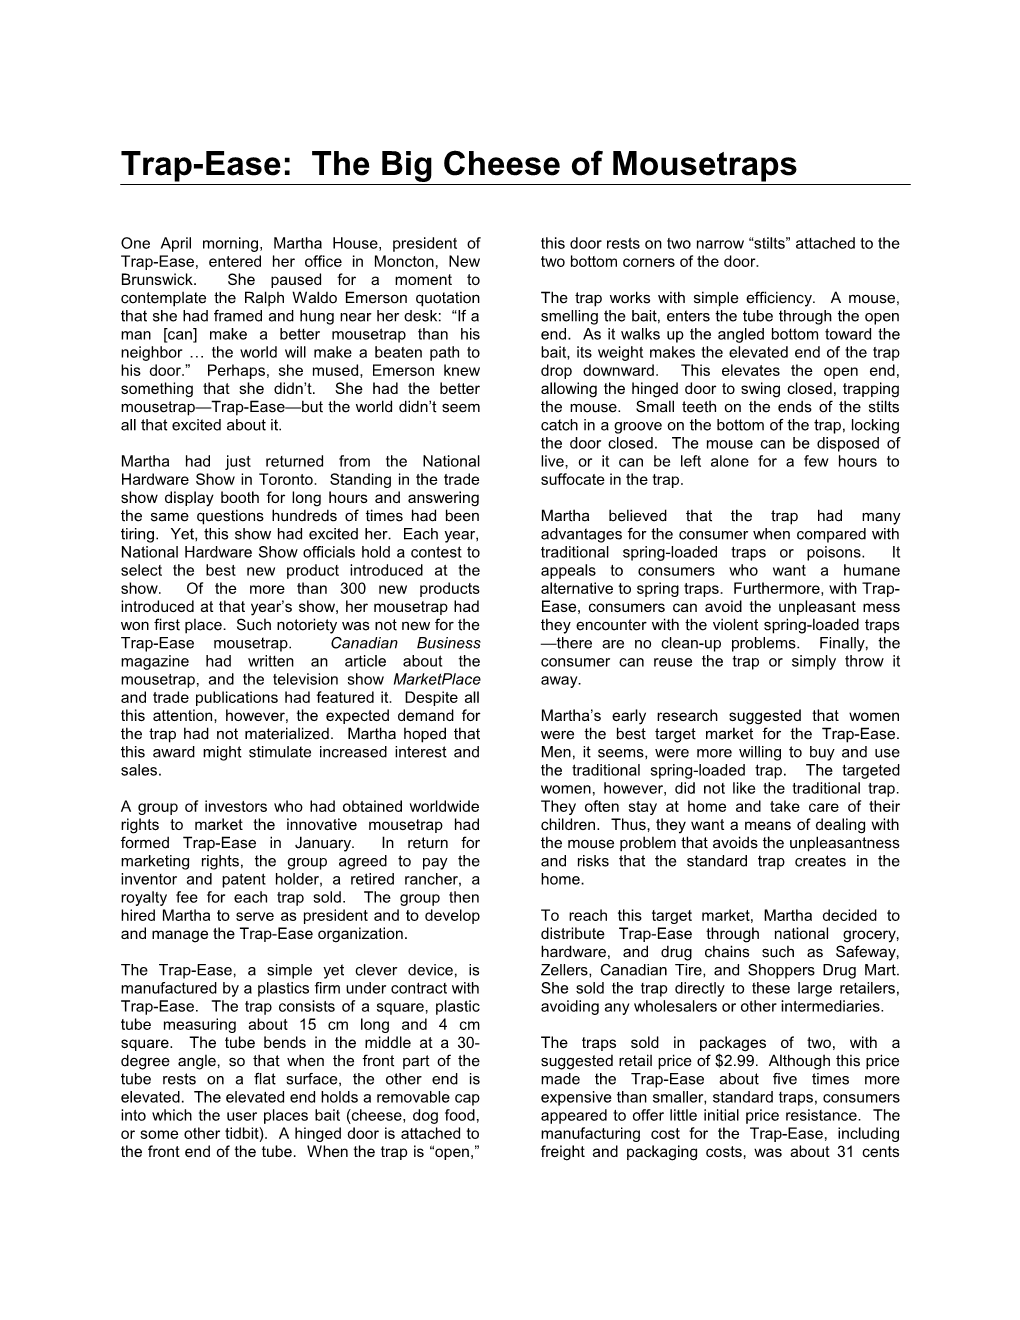 Trap-Ease: the Big Cheese of Mousetraps